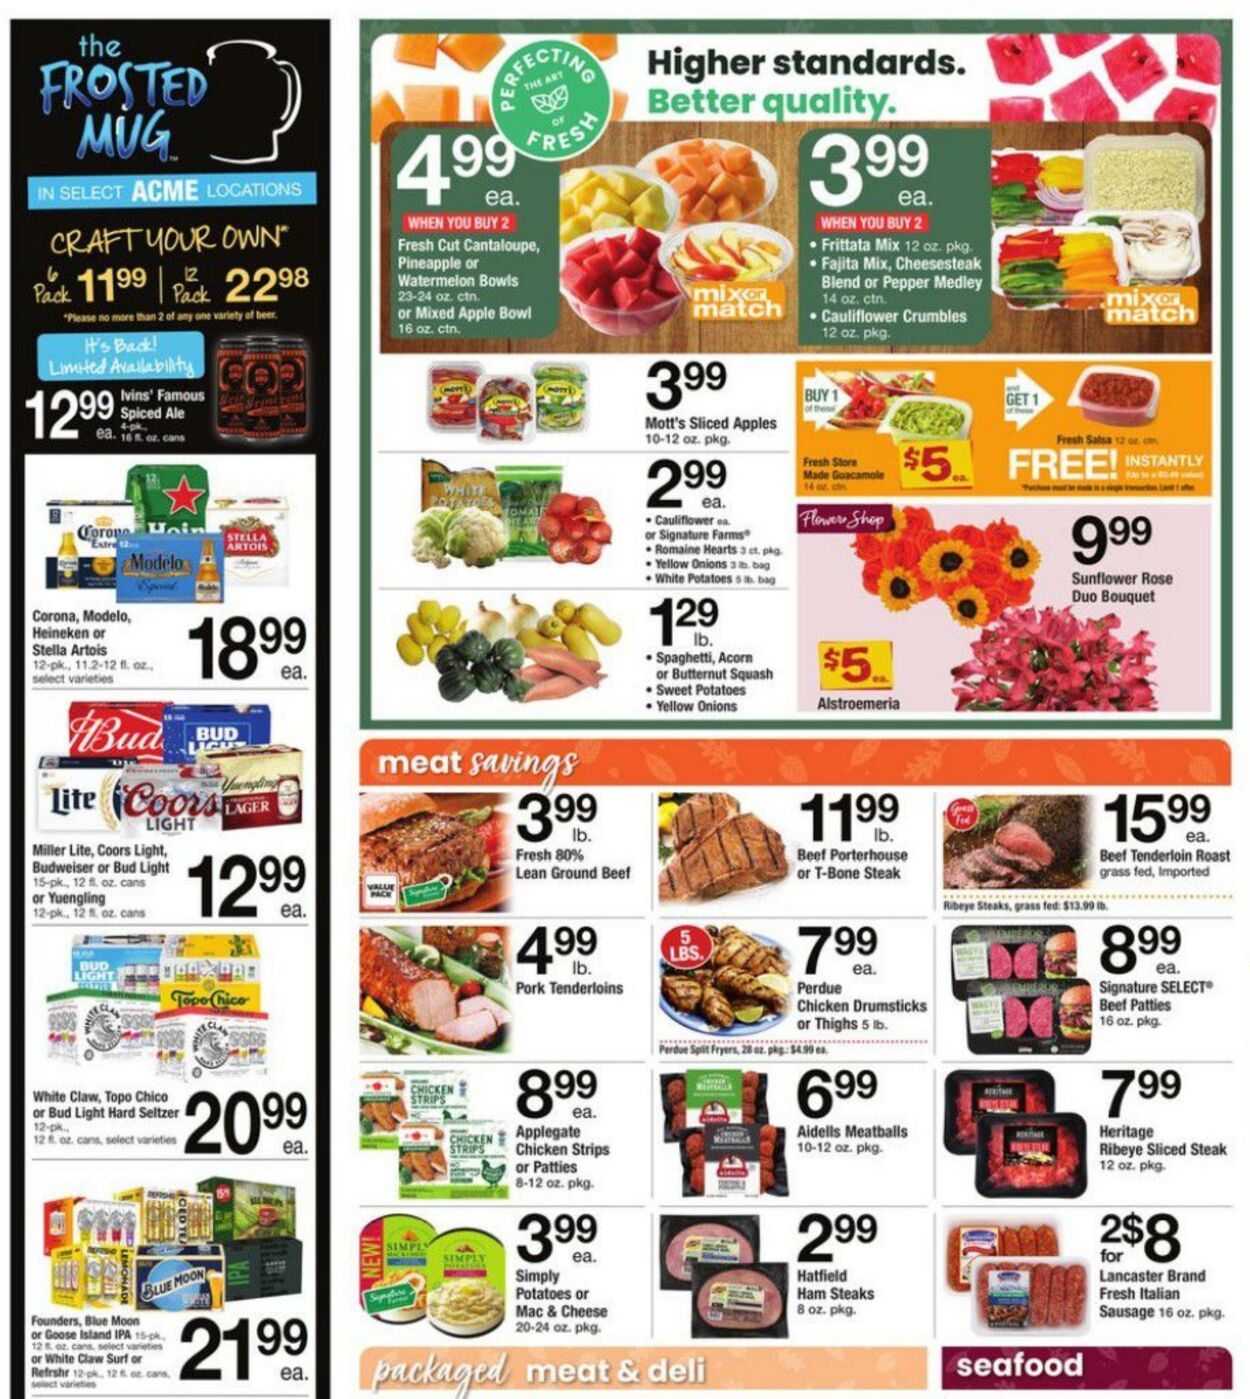 Weekly ad Acme 09/09/2022 - 09/15/2022